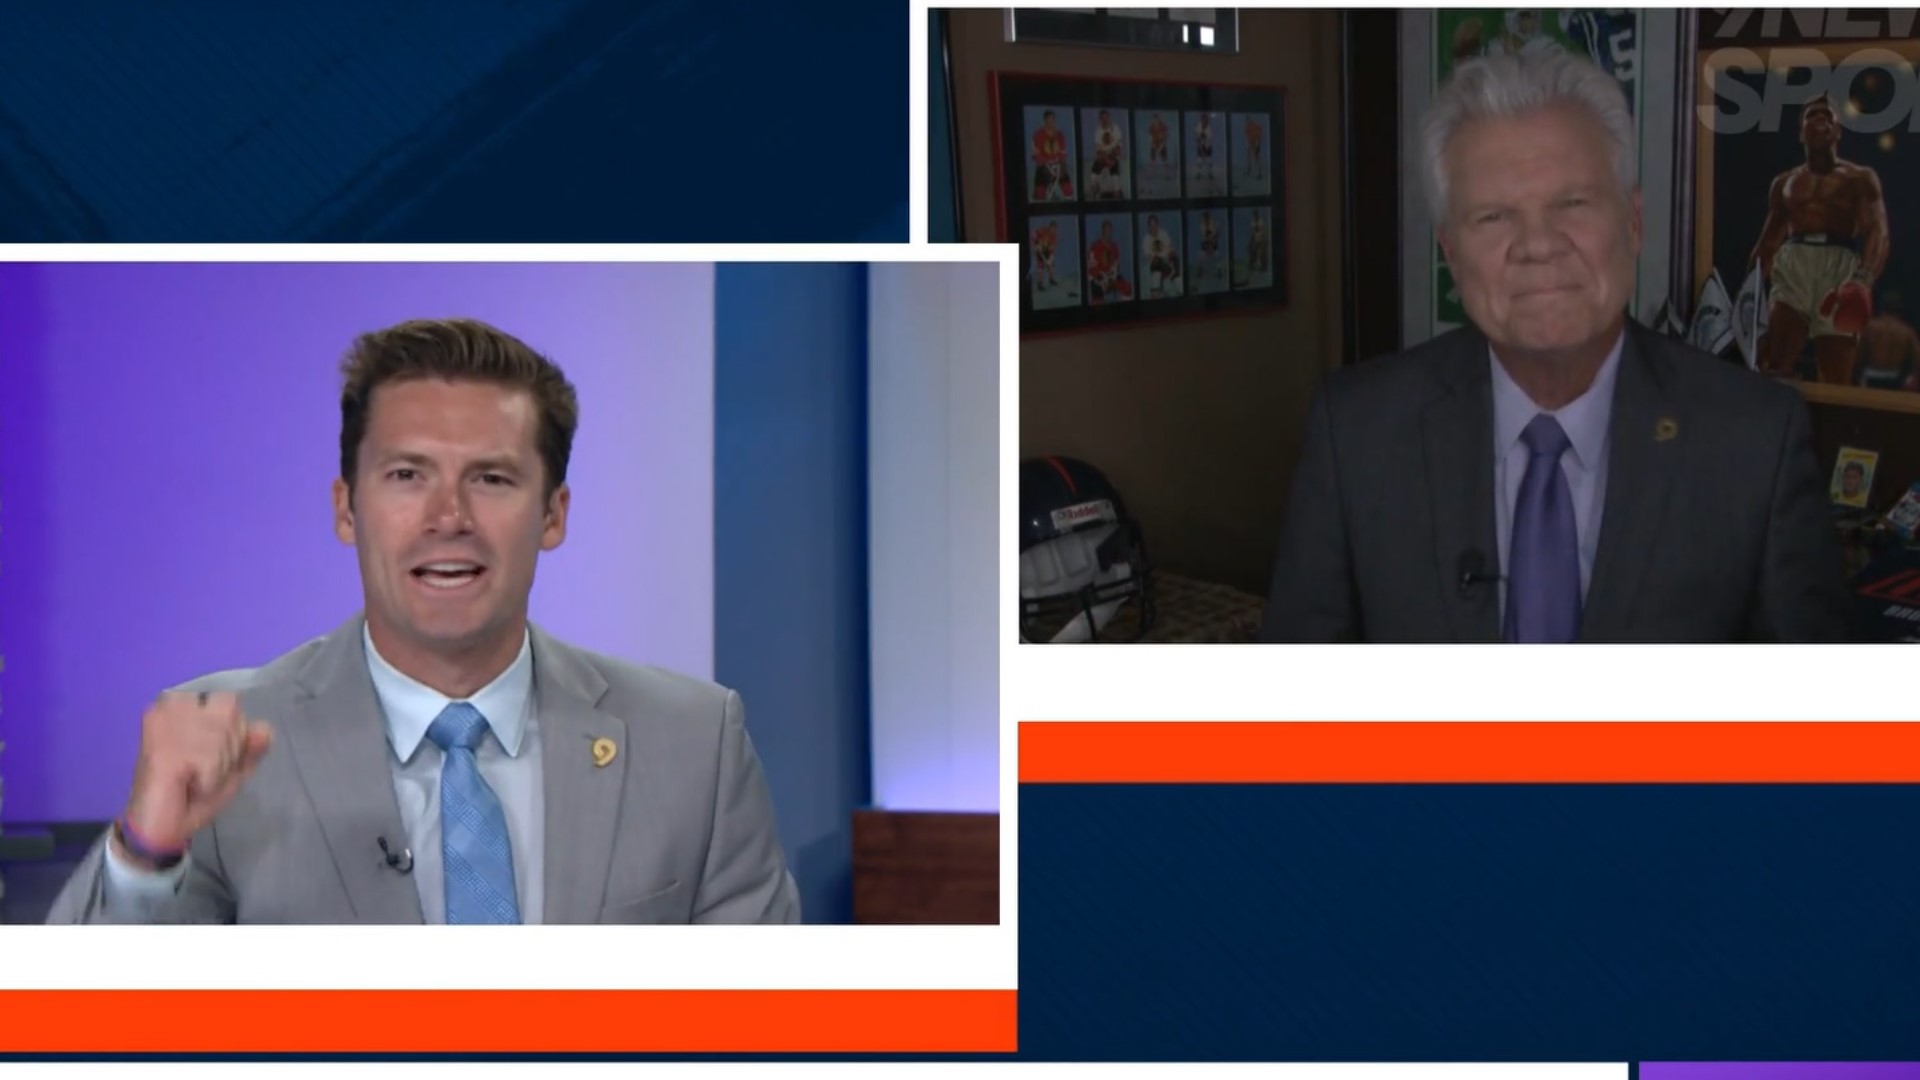 Mike Klis joined Scotty Gange live on 9NEWS to discuss the latest on the Denver Broncos